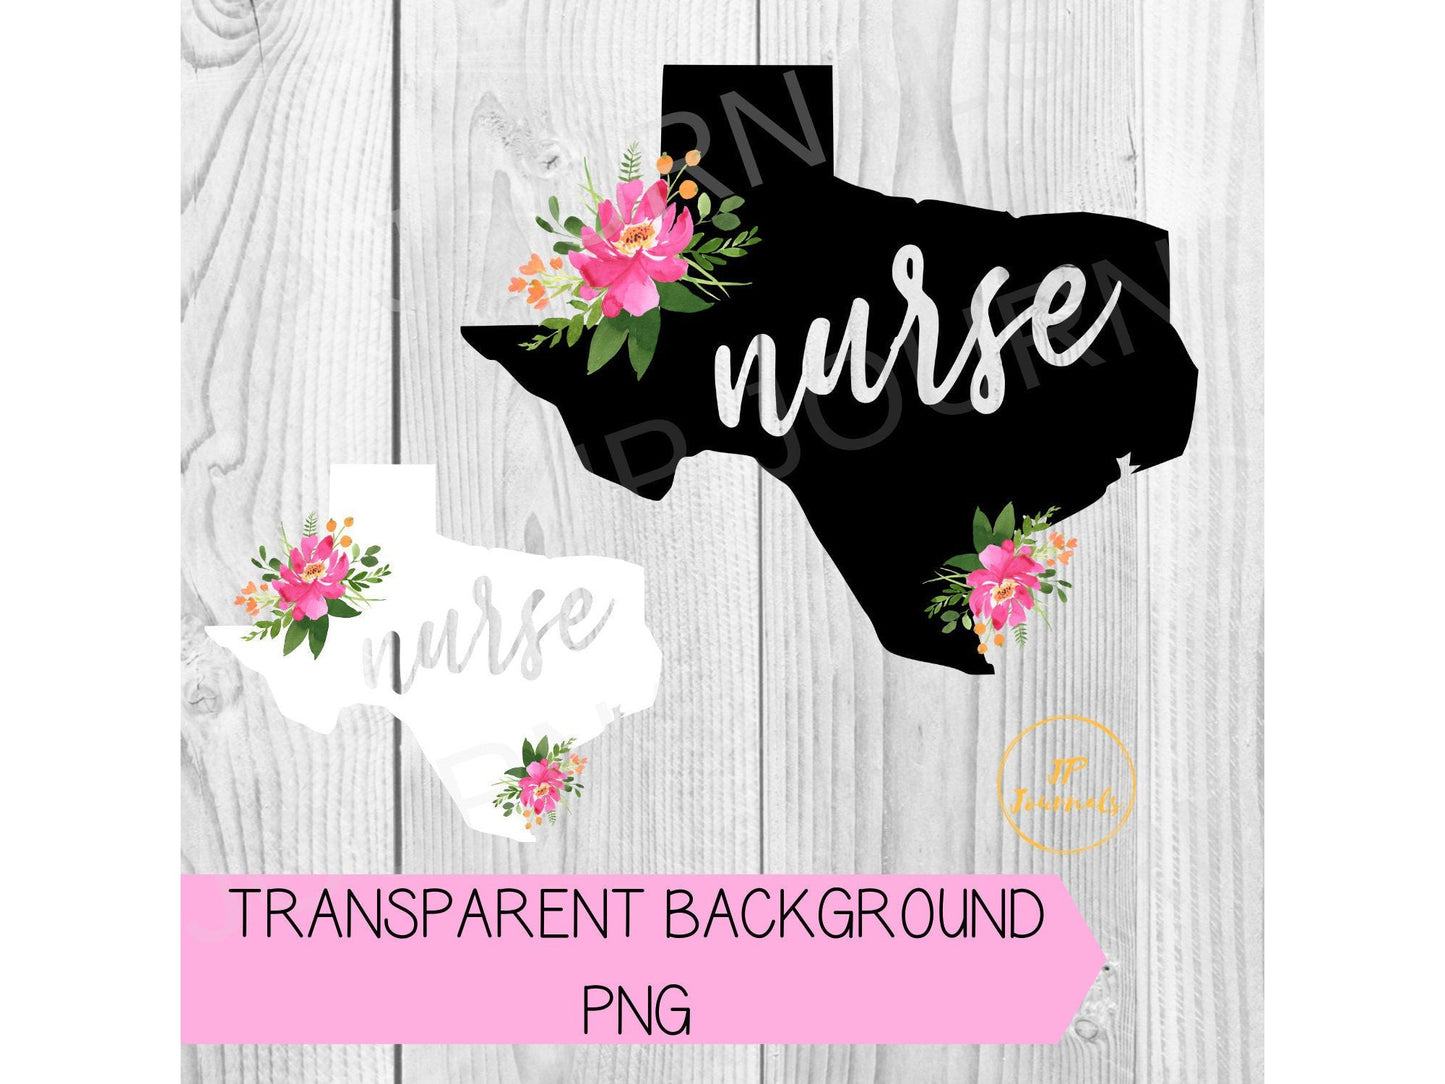 Texas Nurse Watercolor Floral Digital Clip Art for Home Decor, Sublimation, Digital Printing Crafts DIY - Black and White Included!